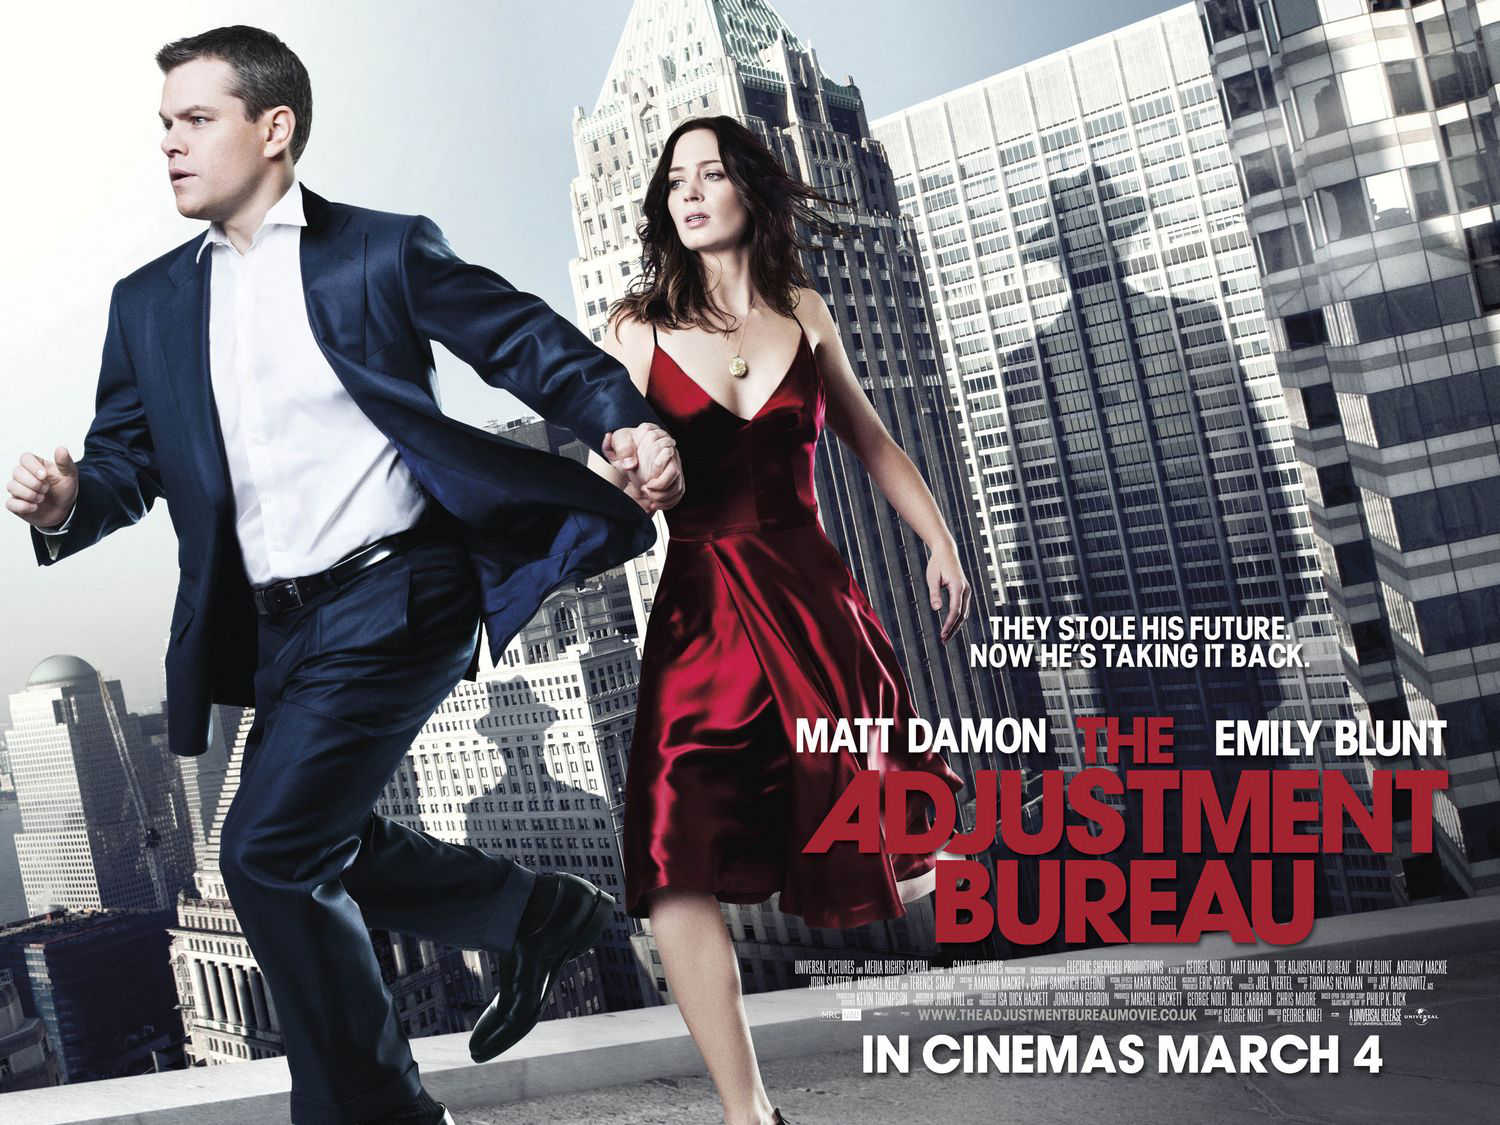 You are currently viewing Notes On A Film: The Adjustment Bureau